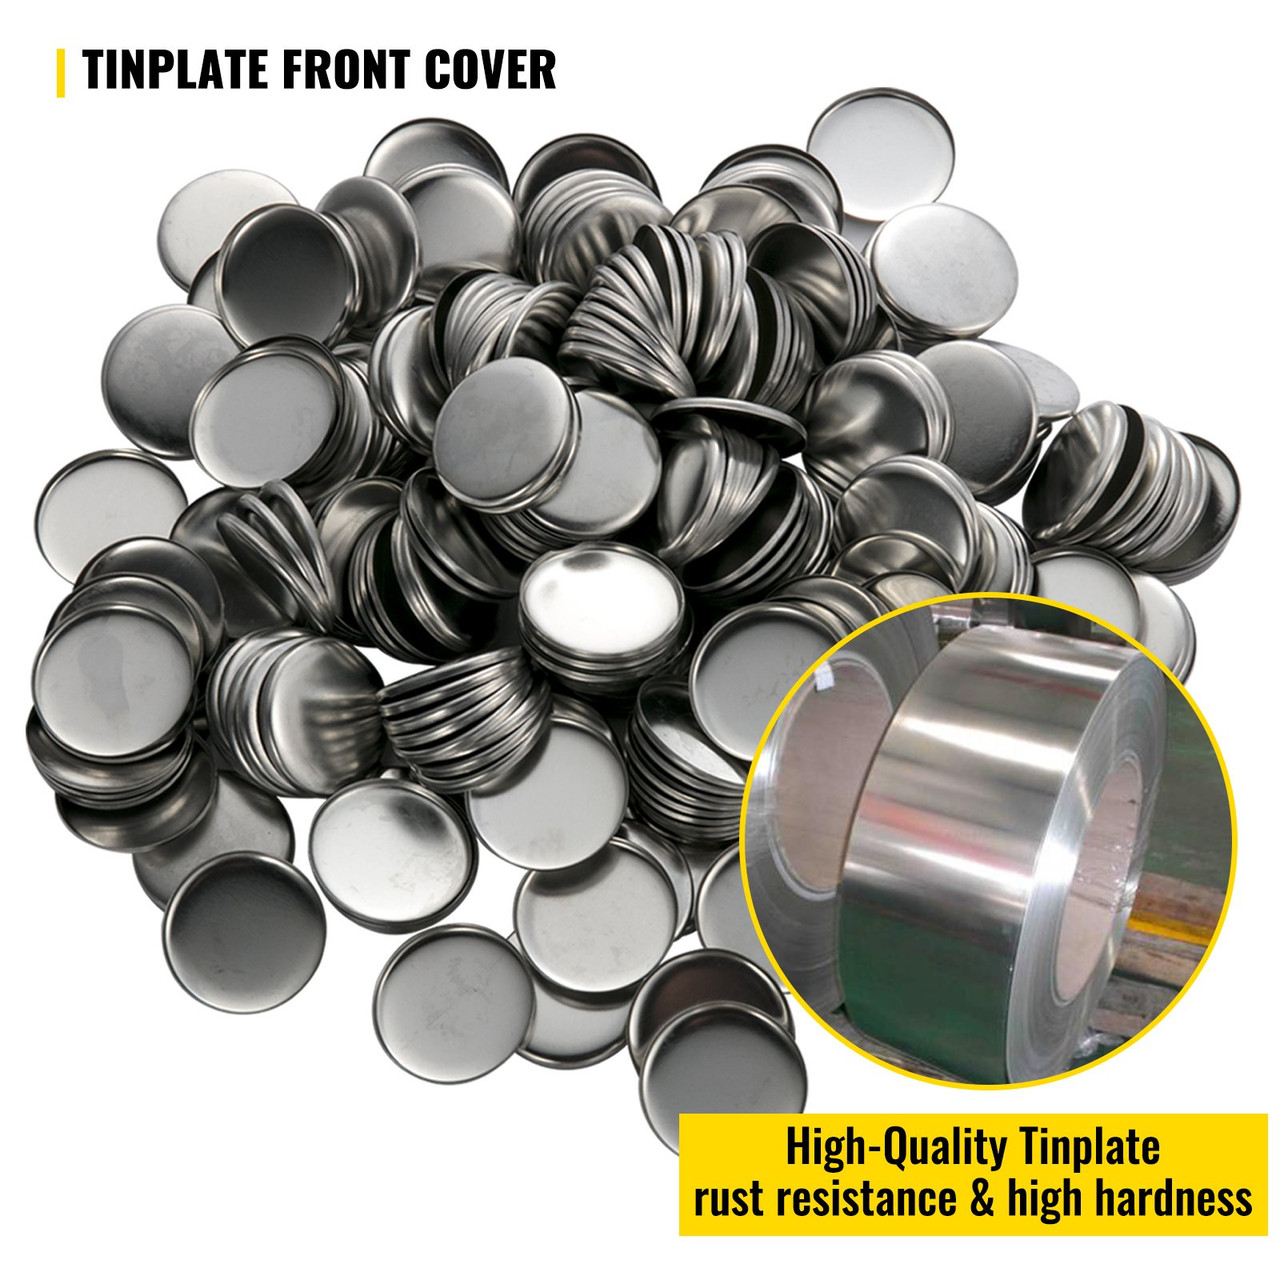 Button Parts for Button Maker 500 Sets Button Badge Parts 32 mm (1-1/4 inch) Button Parts Metal with Clip Pin Top & Bottom Plastic Cover Film Button Maker Parts for Family Use DIY Activities